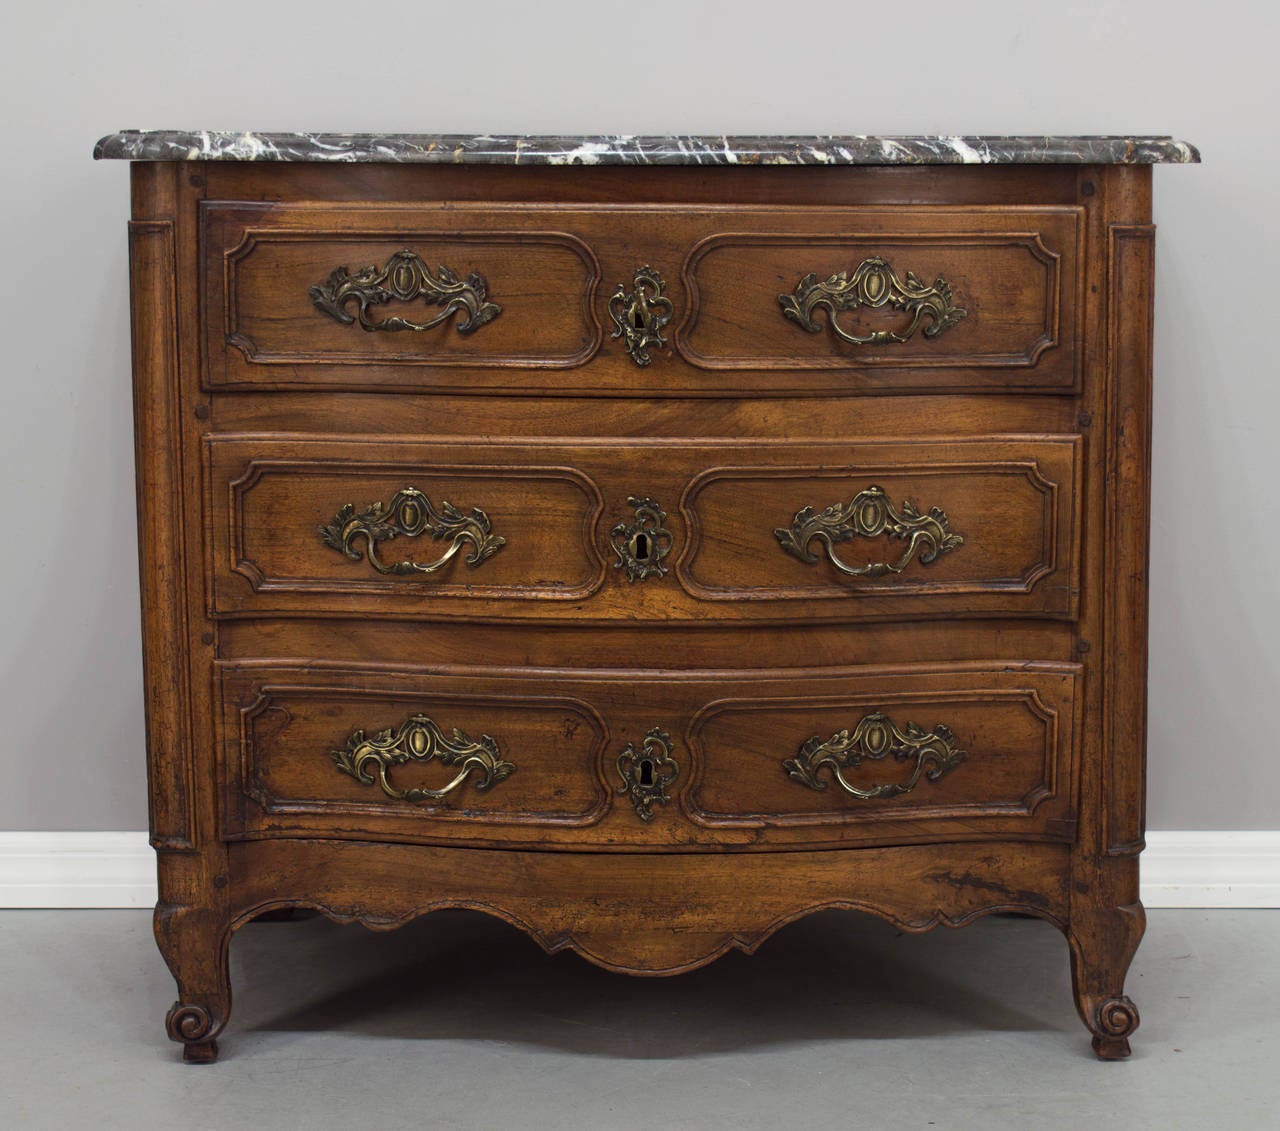 18th century French Louis XV period commode with serpentine front and curved sides, probably from the Burgundy region. Made of walnut with three dovetailed drawers. Bronze hardware is old and of the period, but not original to the piece. Working